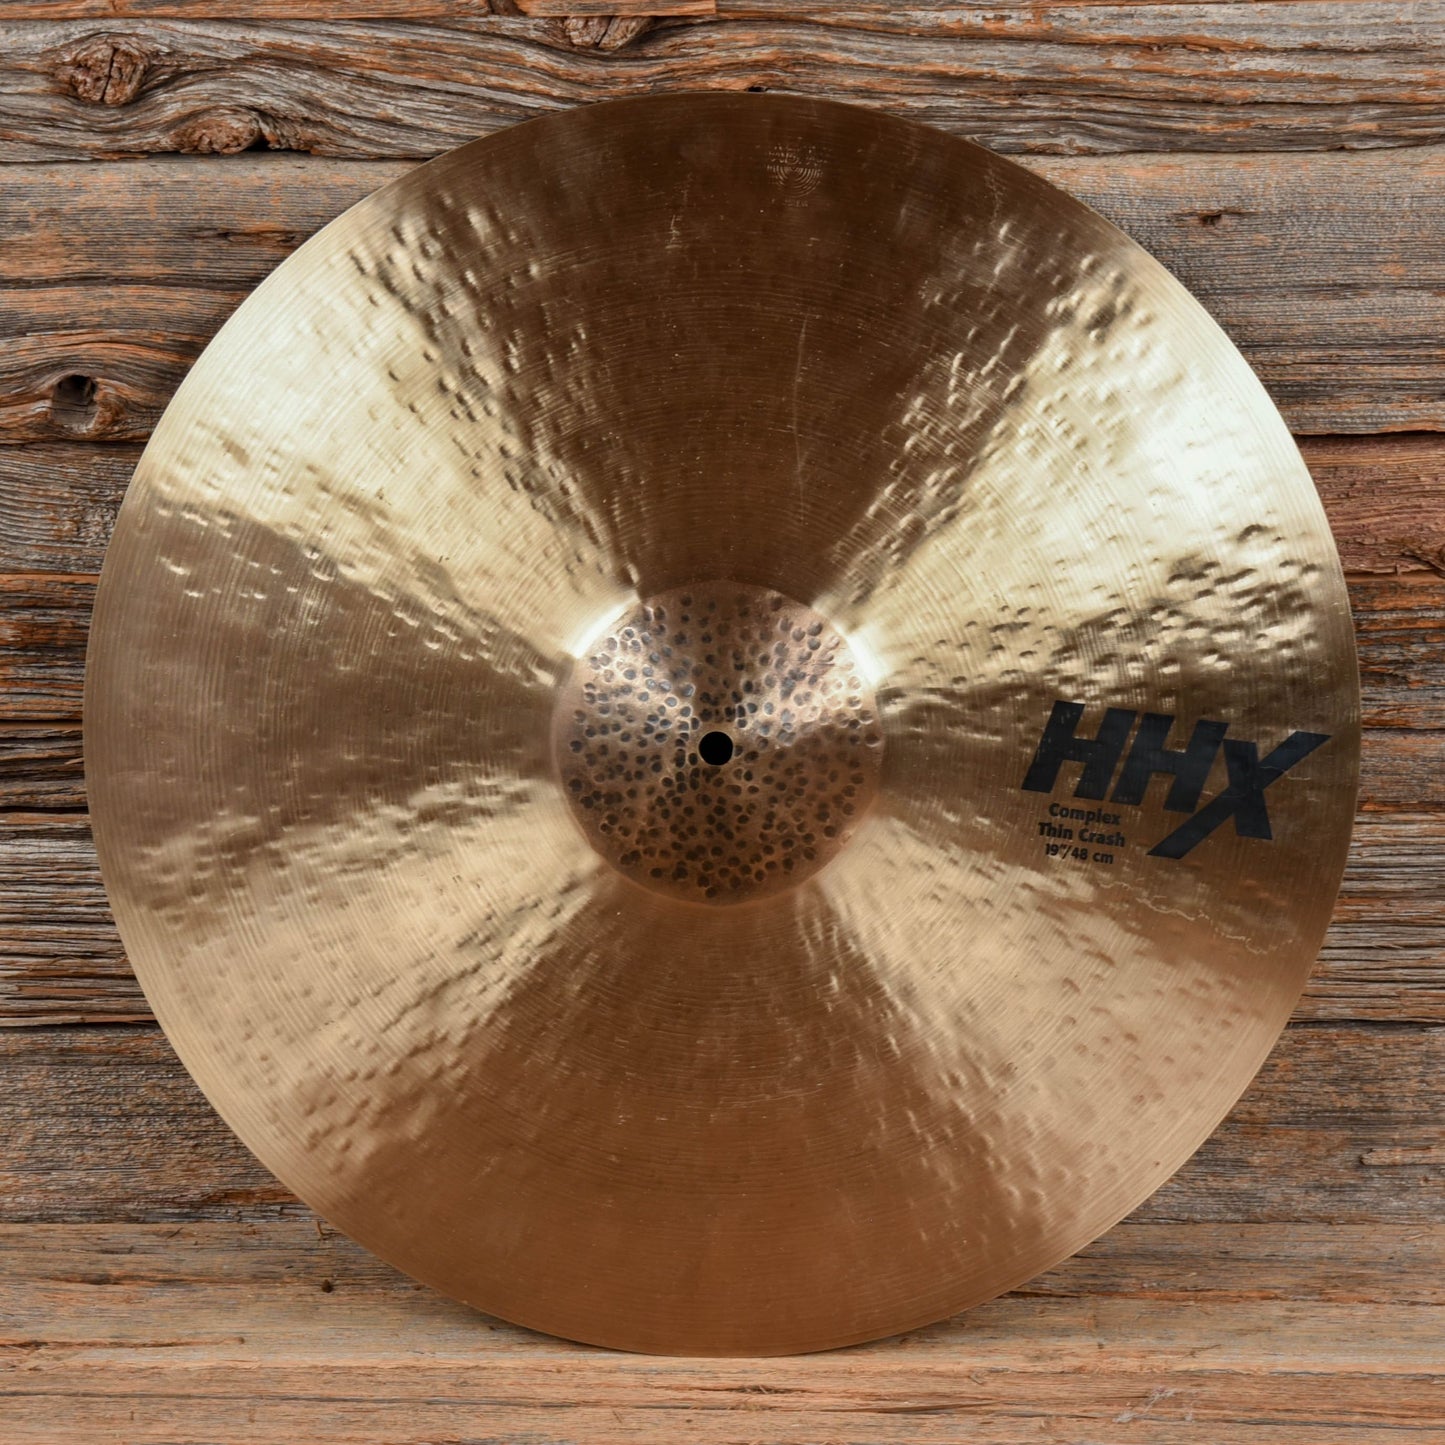 Sabian 19" HHX Complex Thin Crash Cymbal USED Drums and Percussion